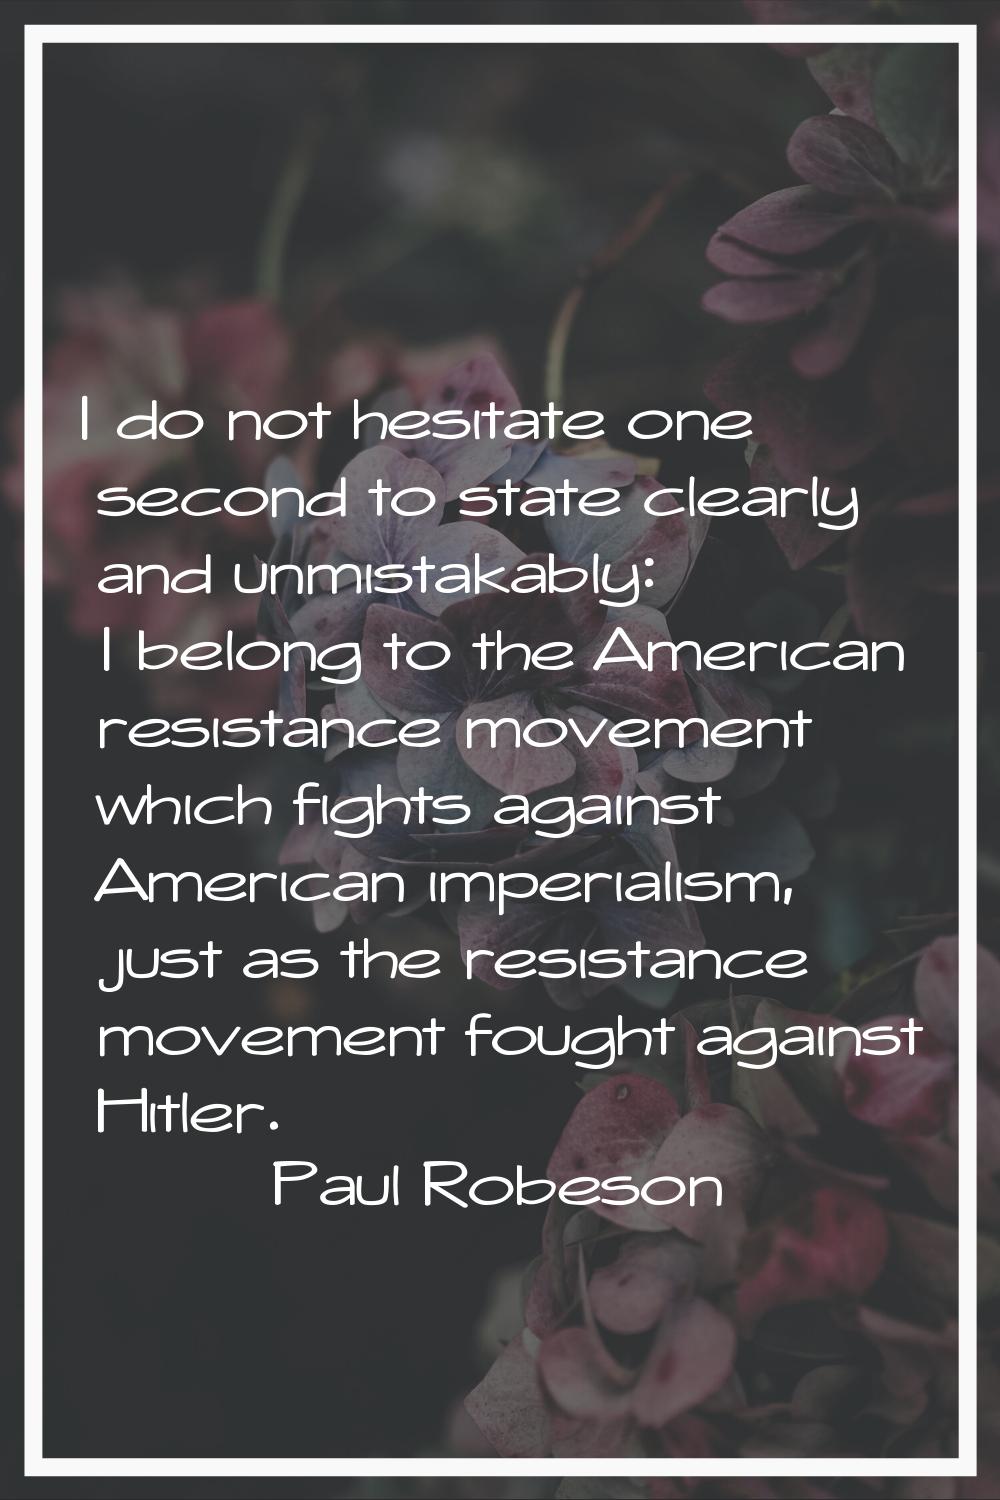 I do not hesitate one second to state clearly and unmistakably: I belong to the American resistance